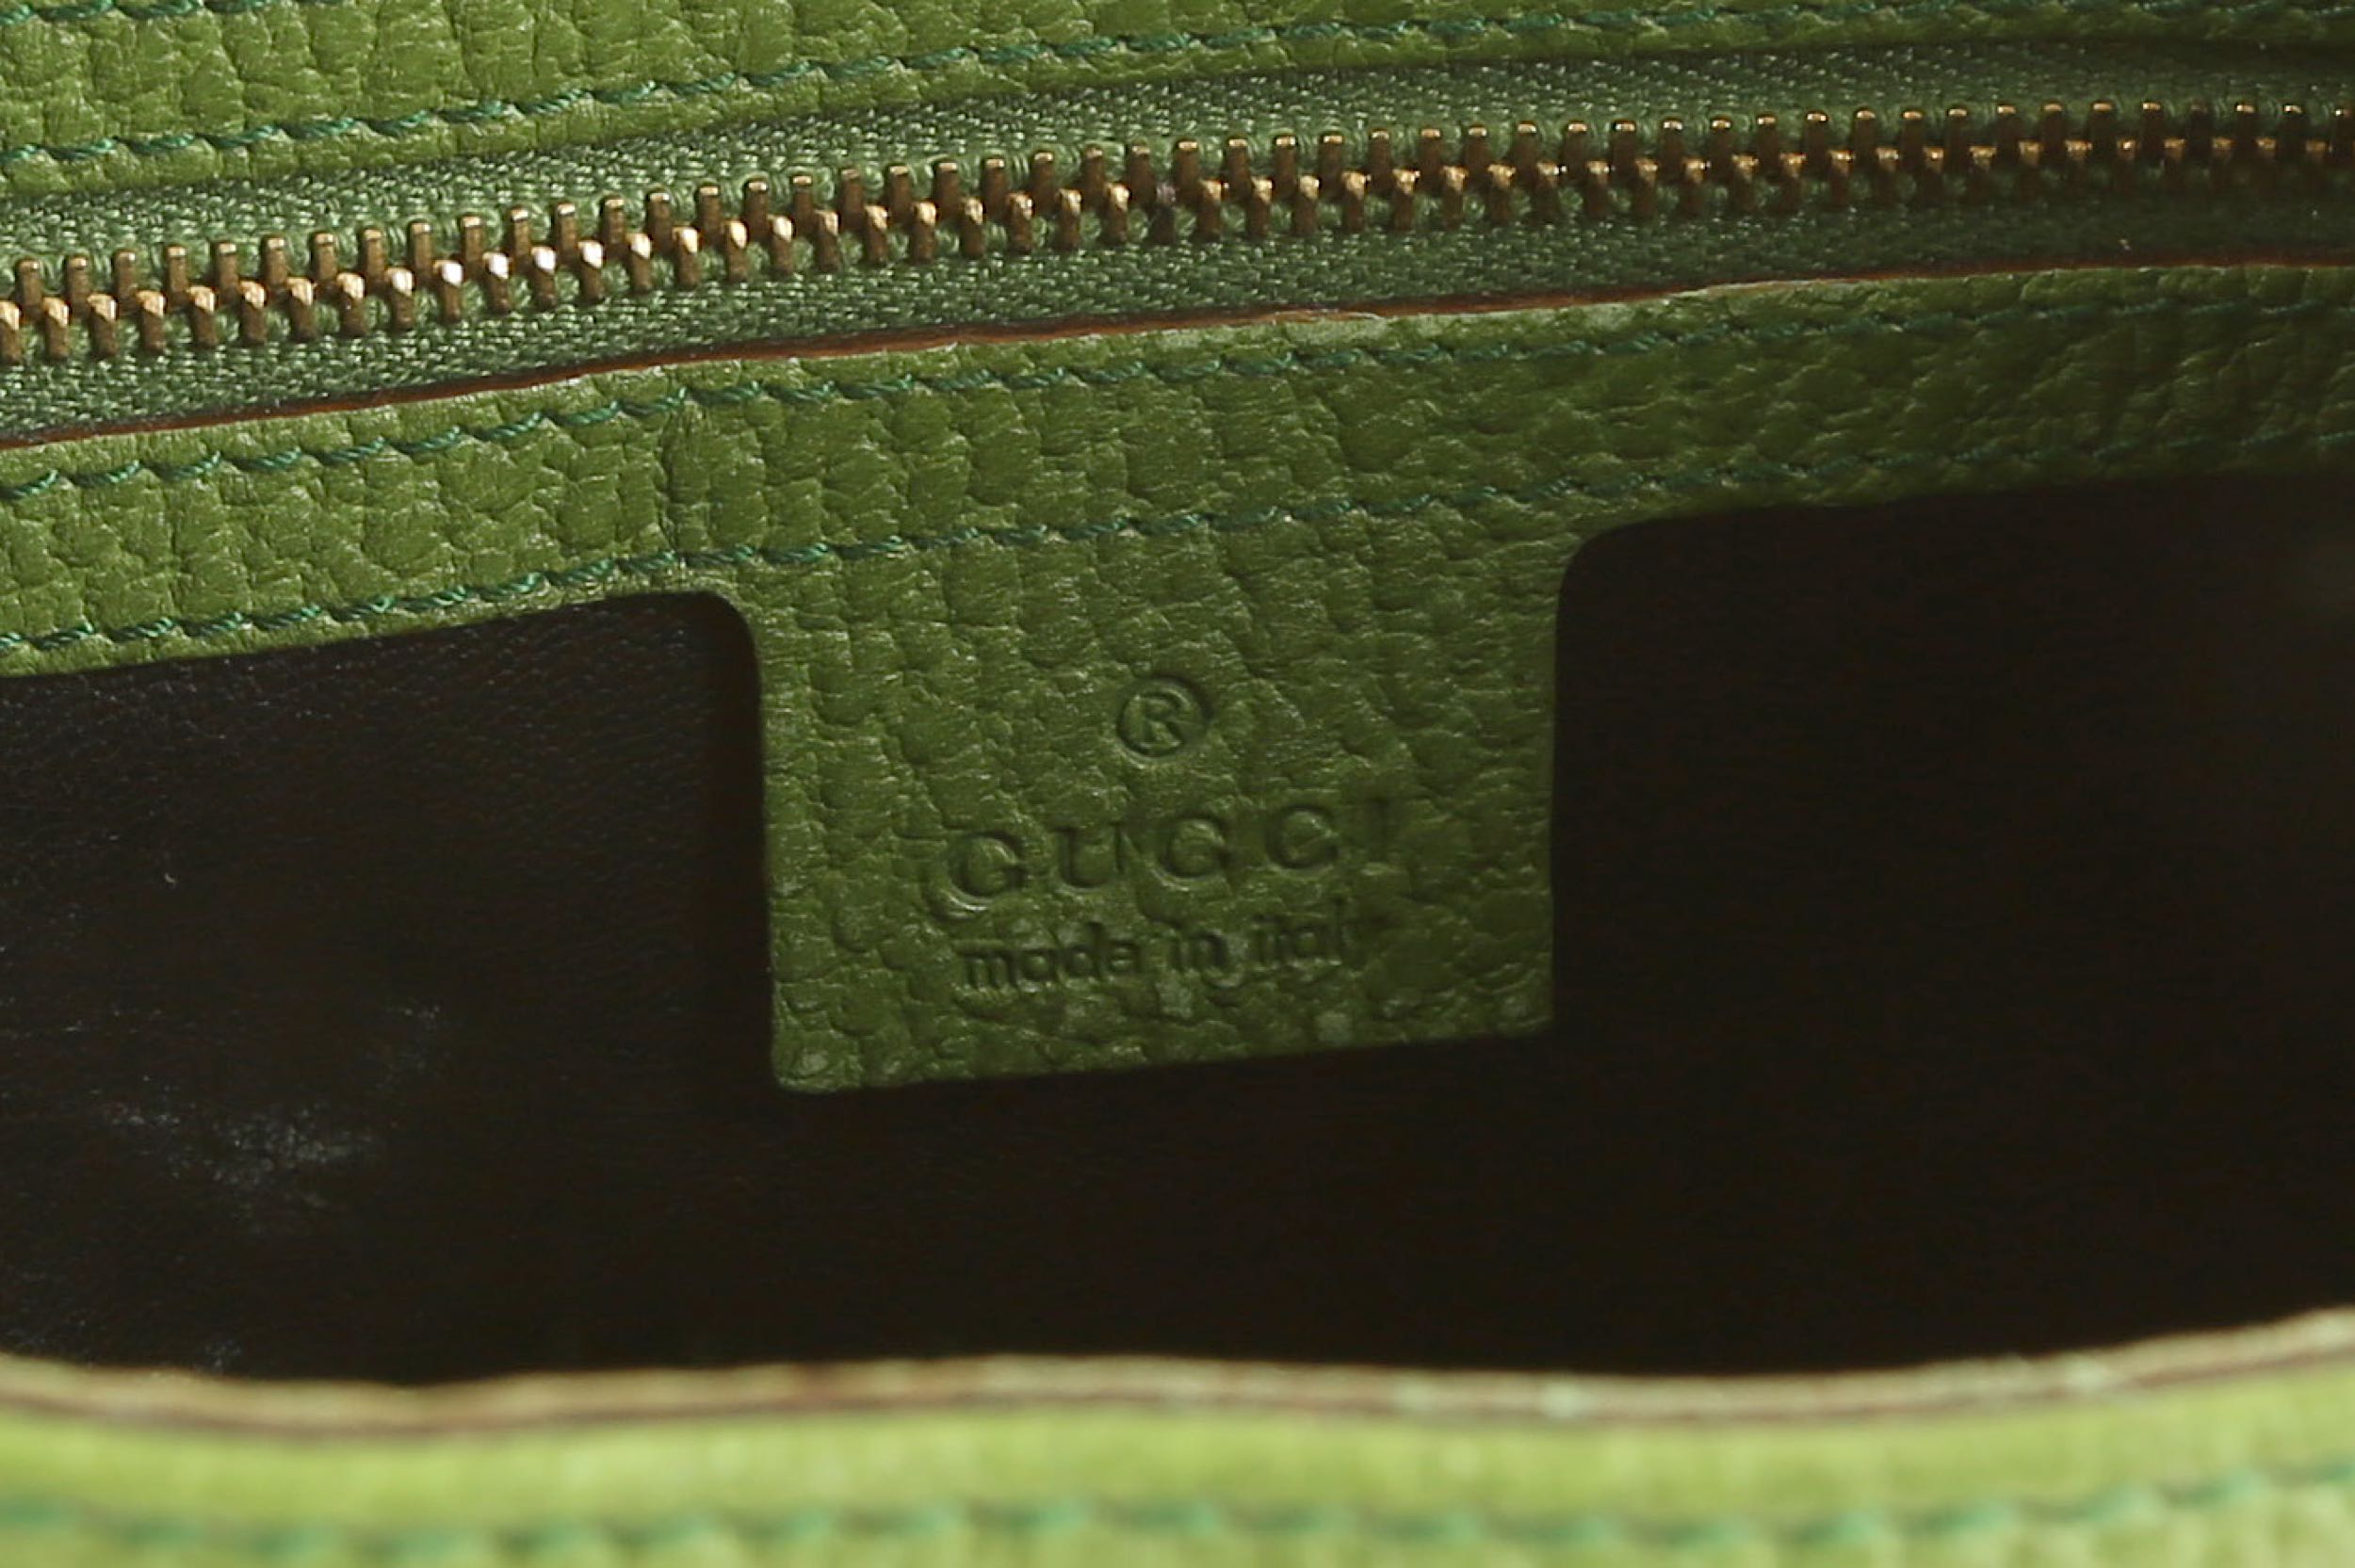 Gucci Green Jackie O Shoulder Bag, grained leather - Image 4 of 4